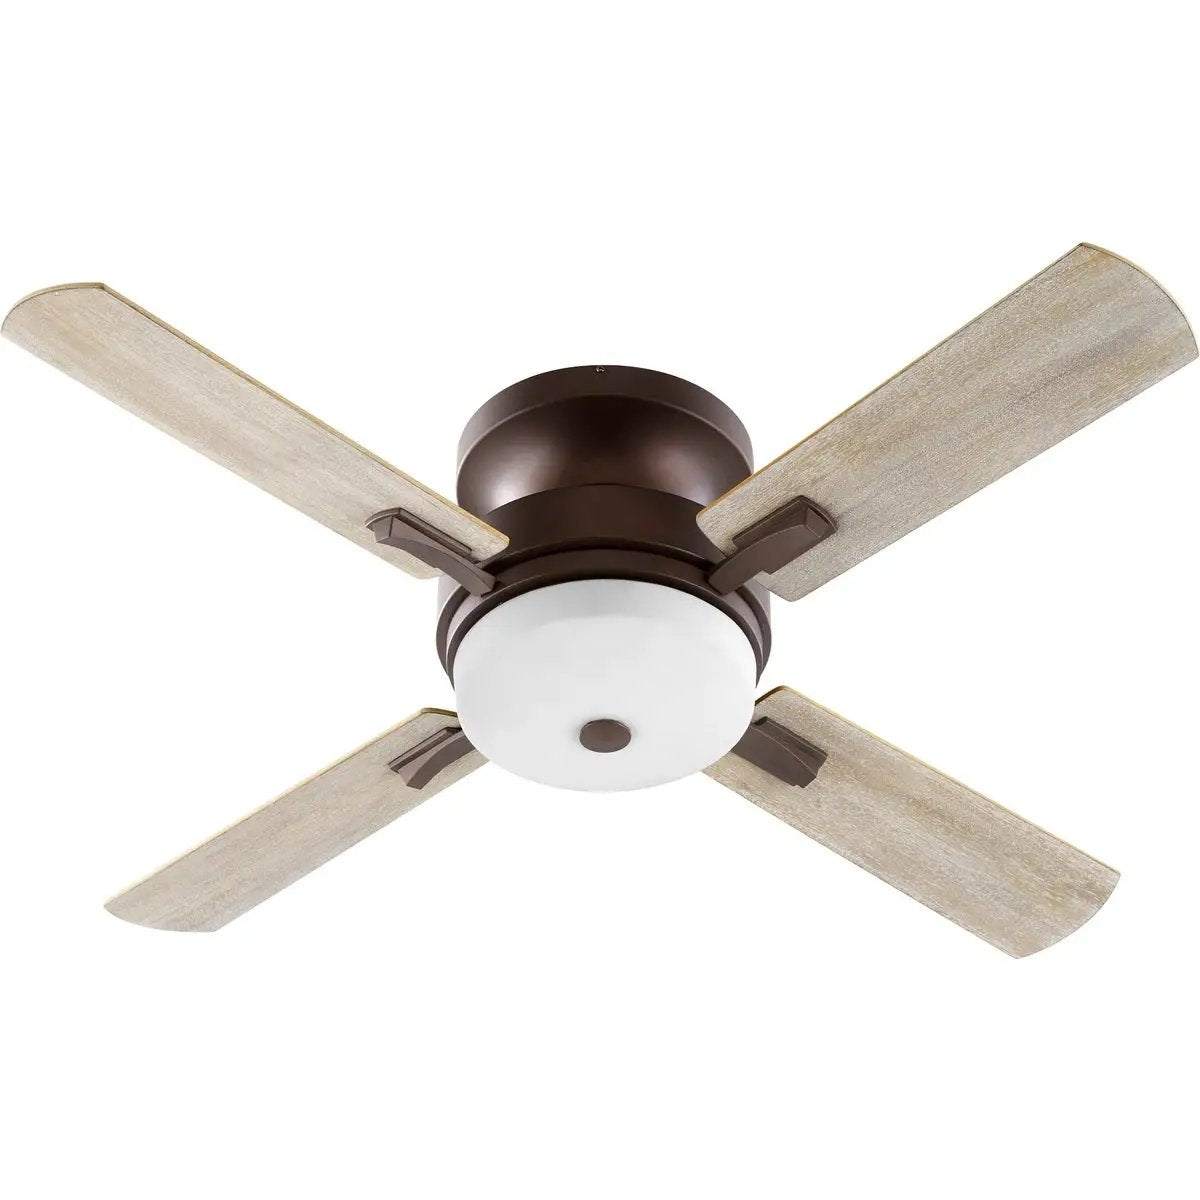 A Quorum International Flush Mount Ceiling Fan with Light, featuring slightly curved blades and inconspicuous housing. Effortlessly provides cooling comfort with a 52" sweep, perfect for areas with less overhead clearance. Includes 3 LED lamps and a light kit with a maximum wattage of 13.5 Watts. UL Listed for dry locations. Limited Lifetime warranty.